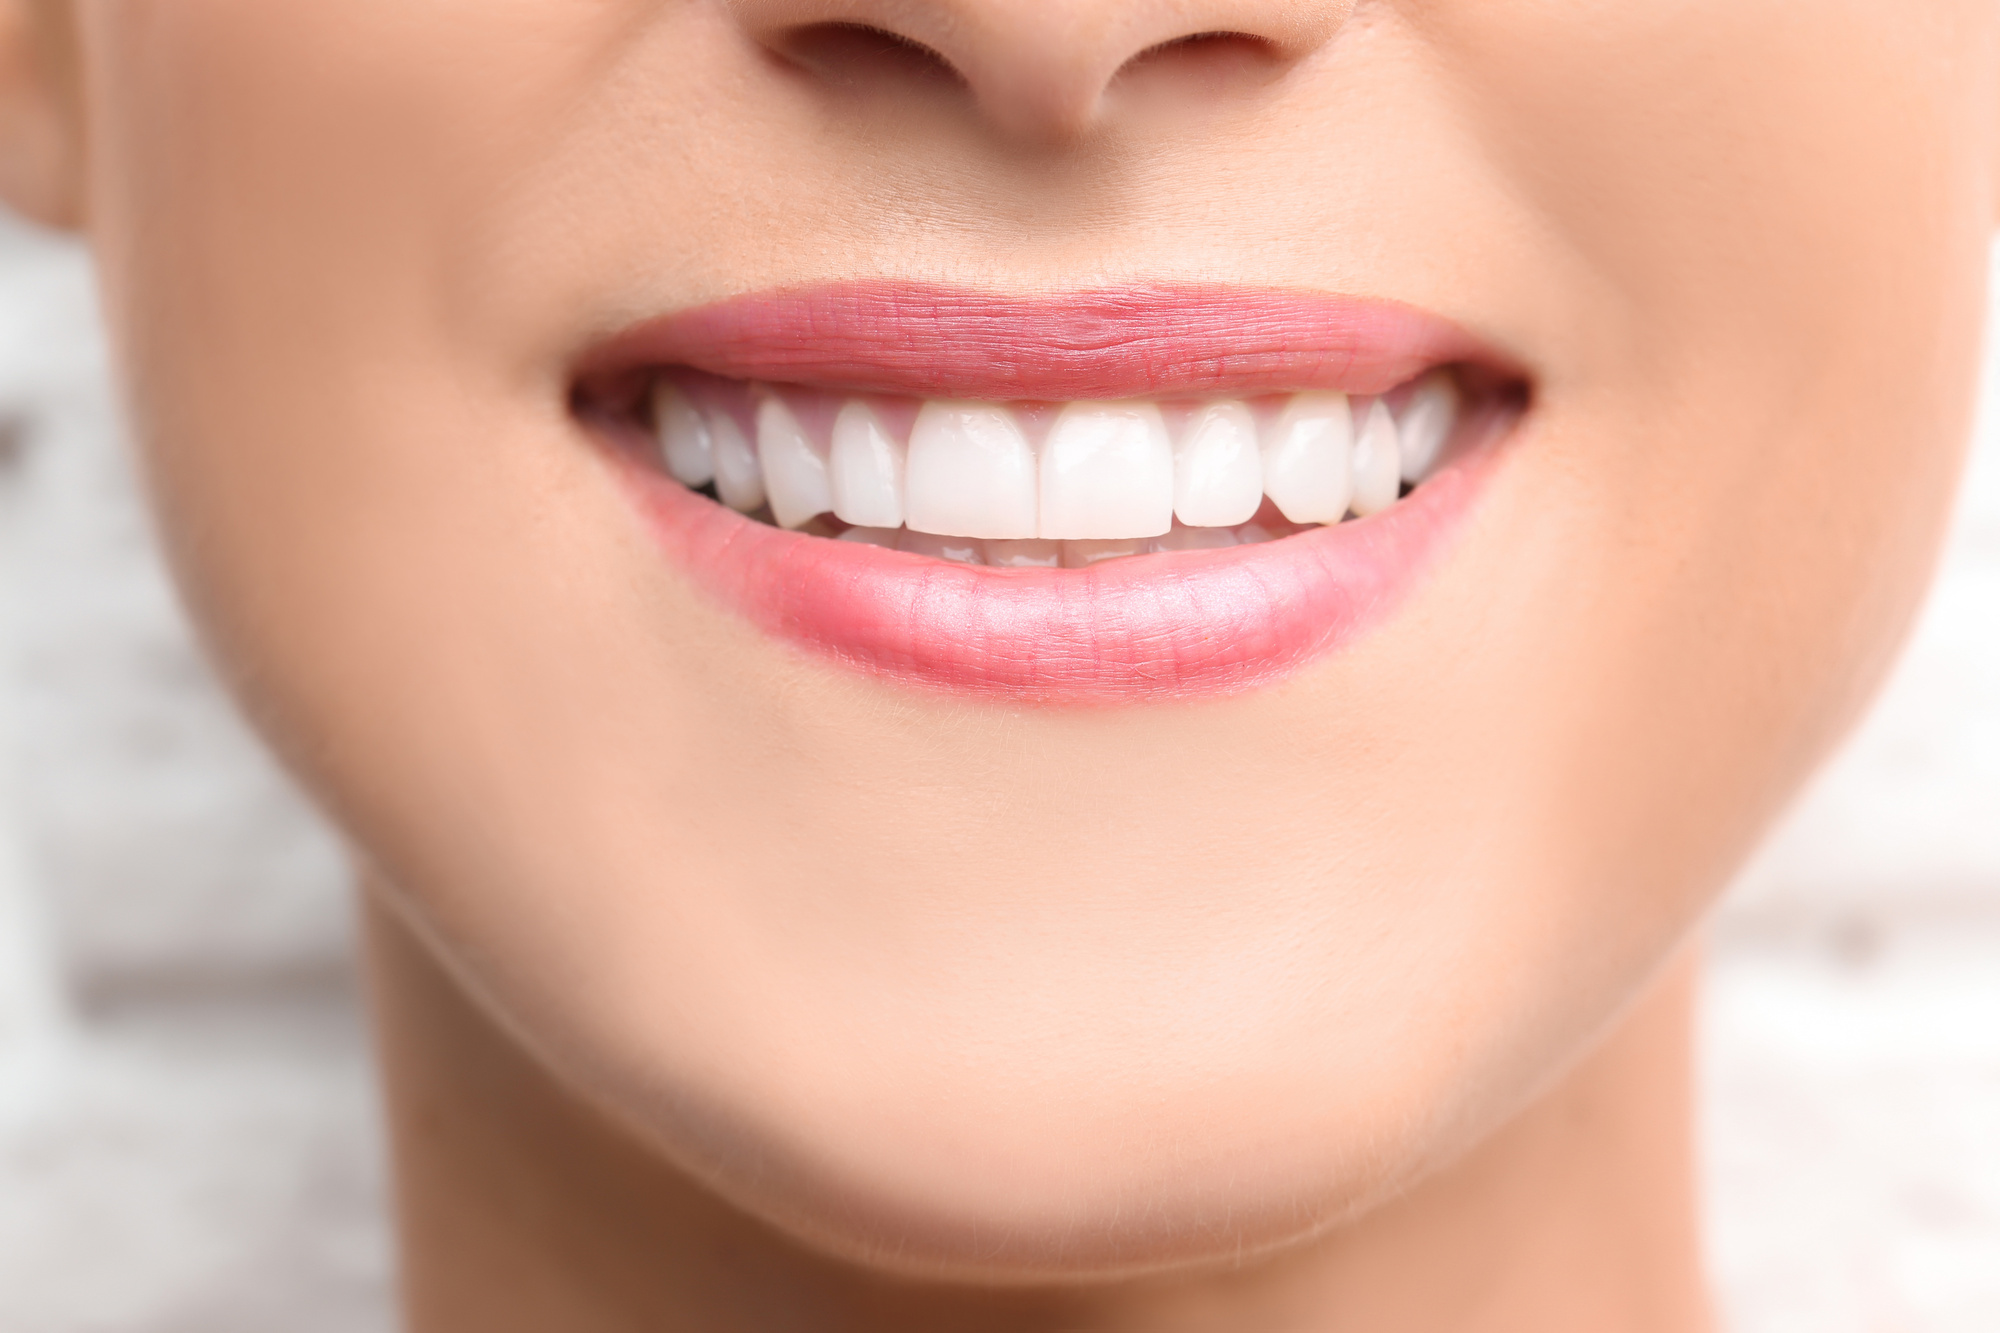 Teeth Bonding 101: Everything You Need to Know About the Procedure